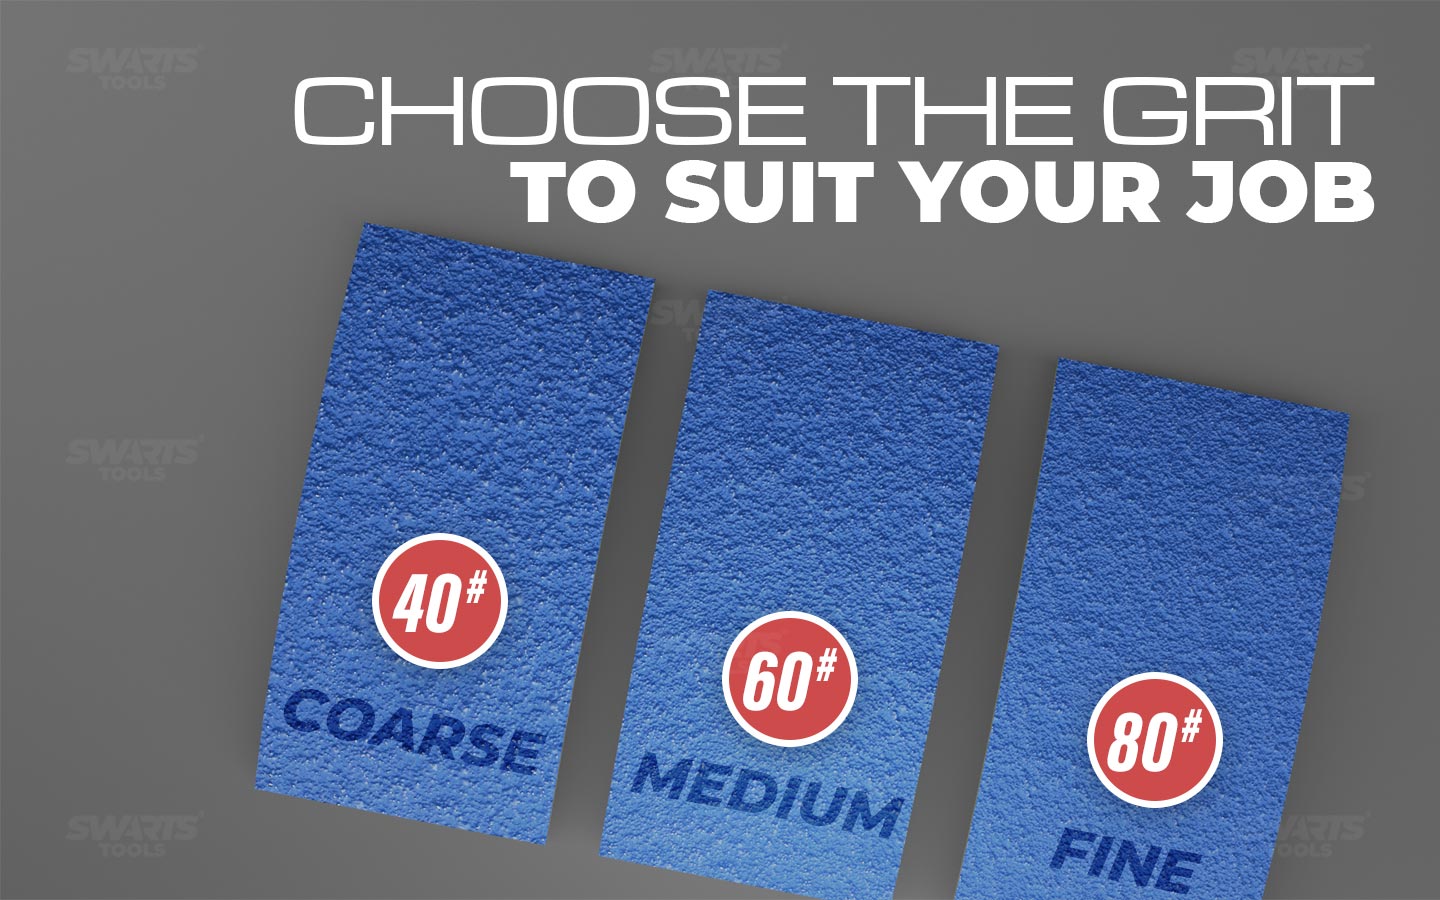 choose the grit to suit your job: 40#, 60#, 80#